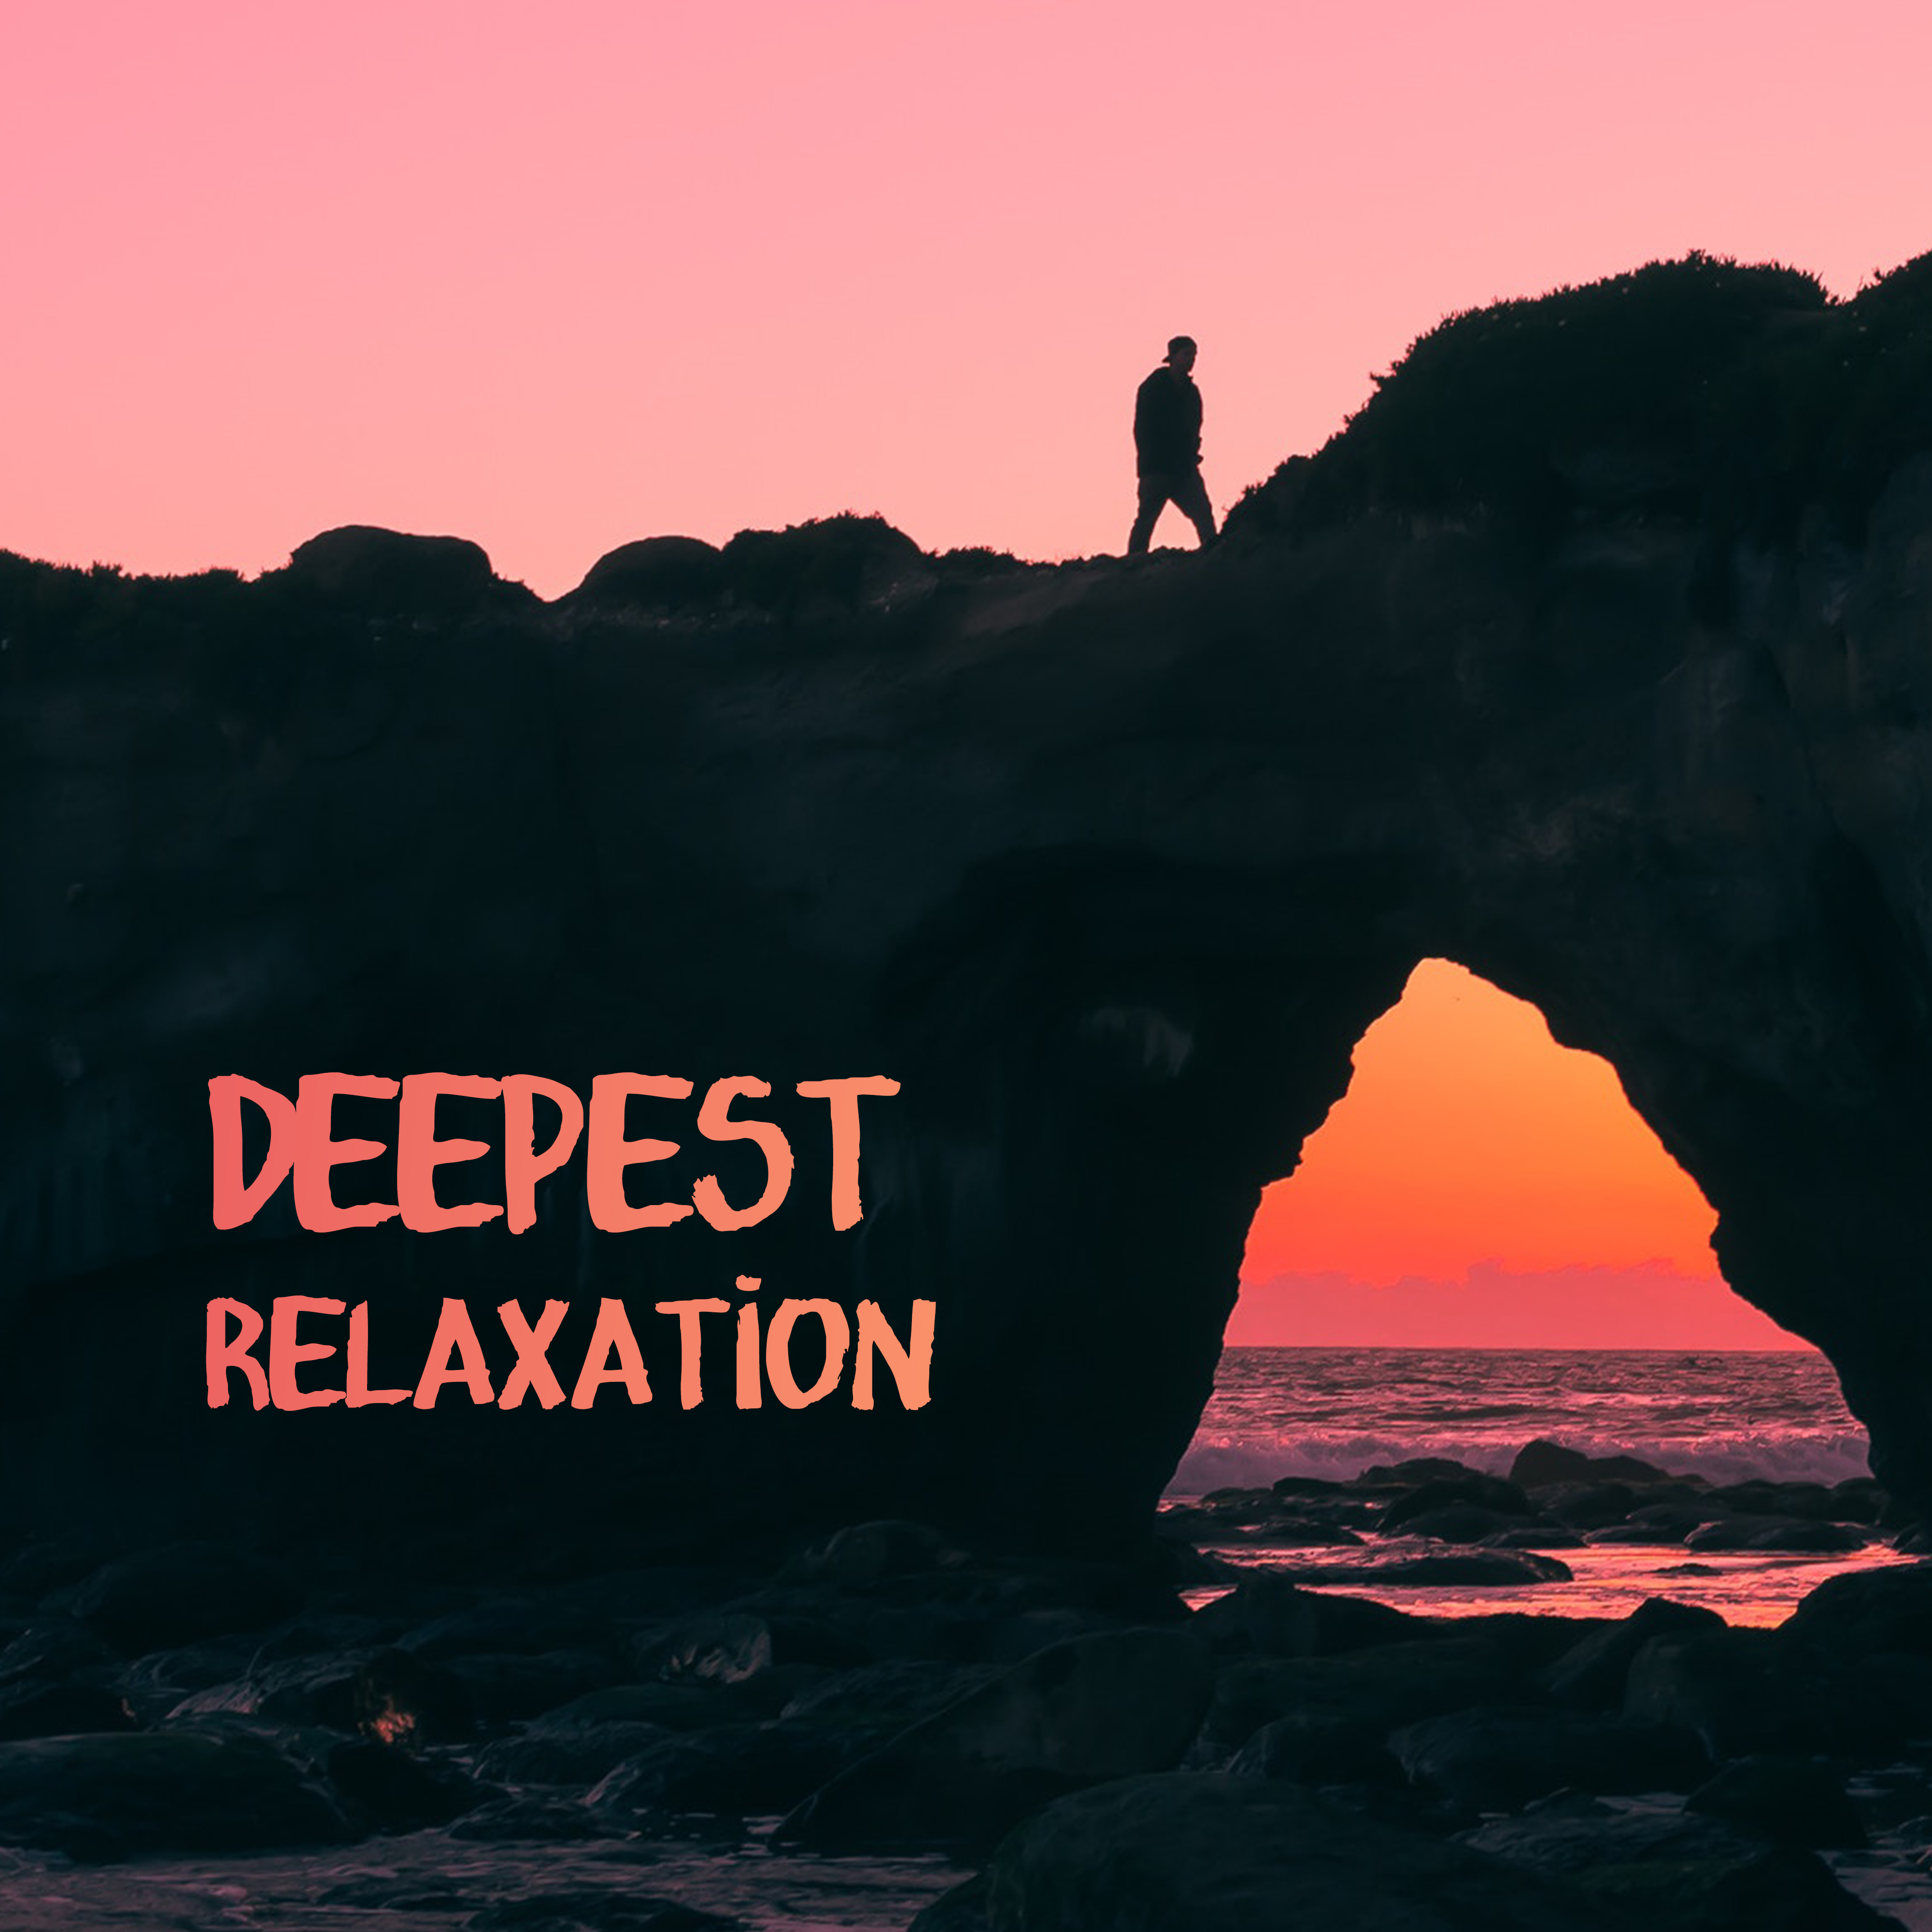 Deepest Relaxation  Peaceful and Completely Relaxing Music to Rest, Laze, DeStress after a Hard Day and Gain New Strength